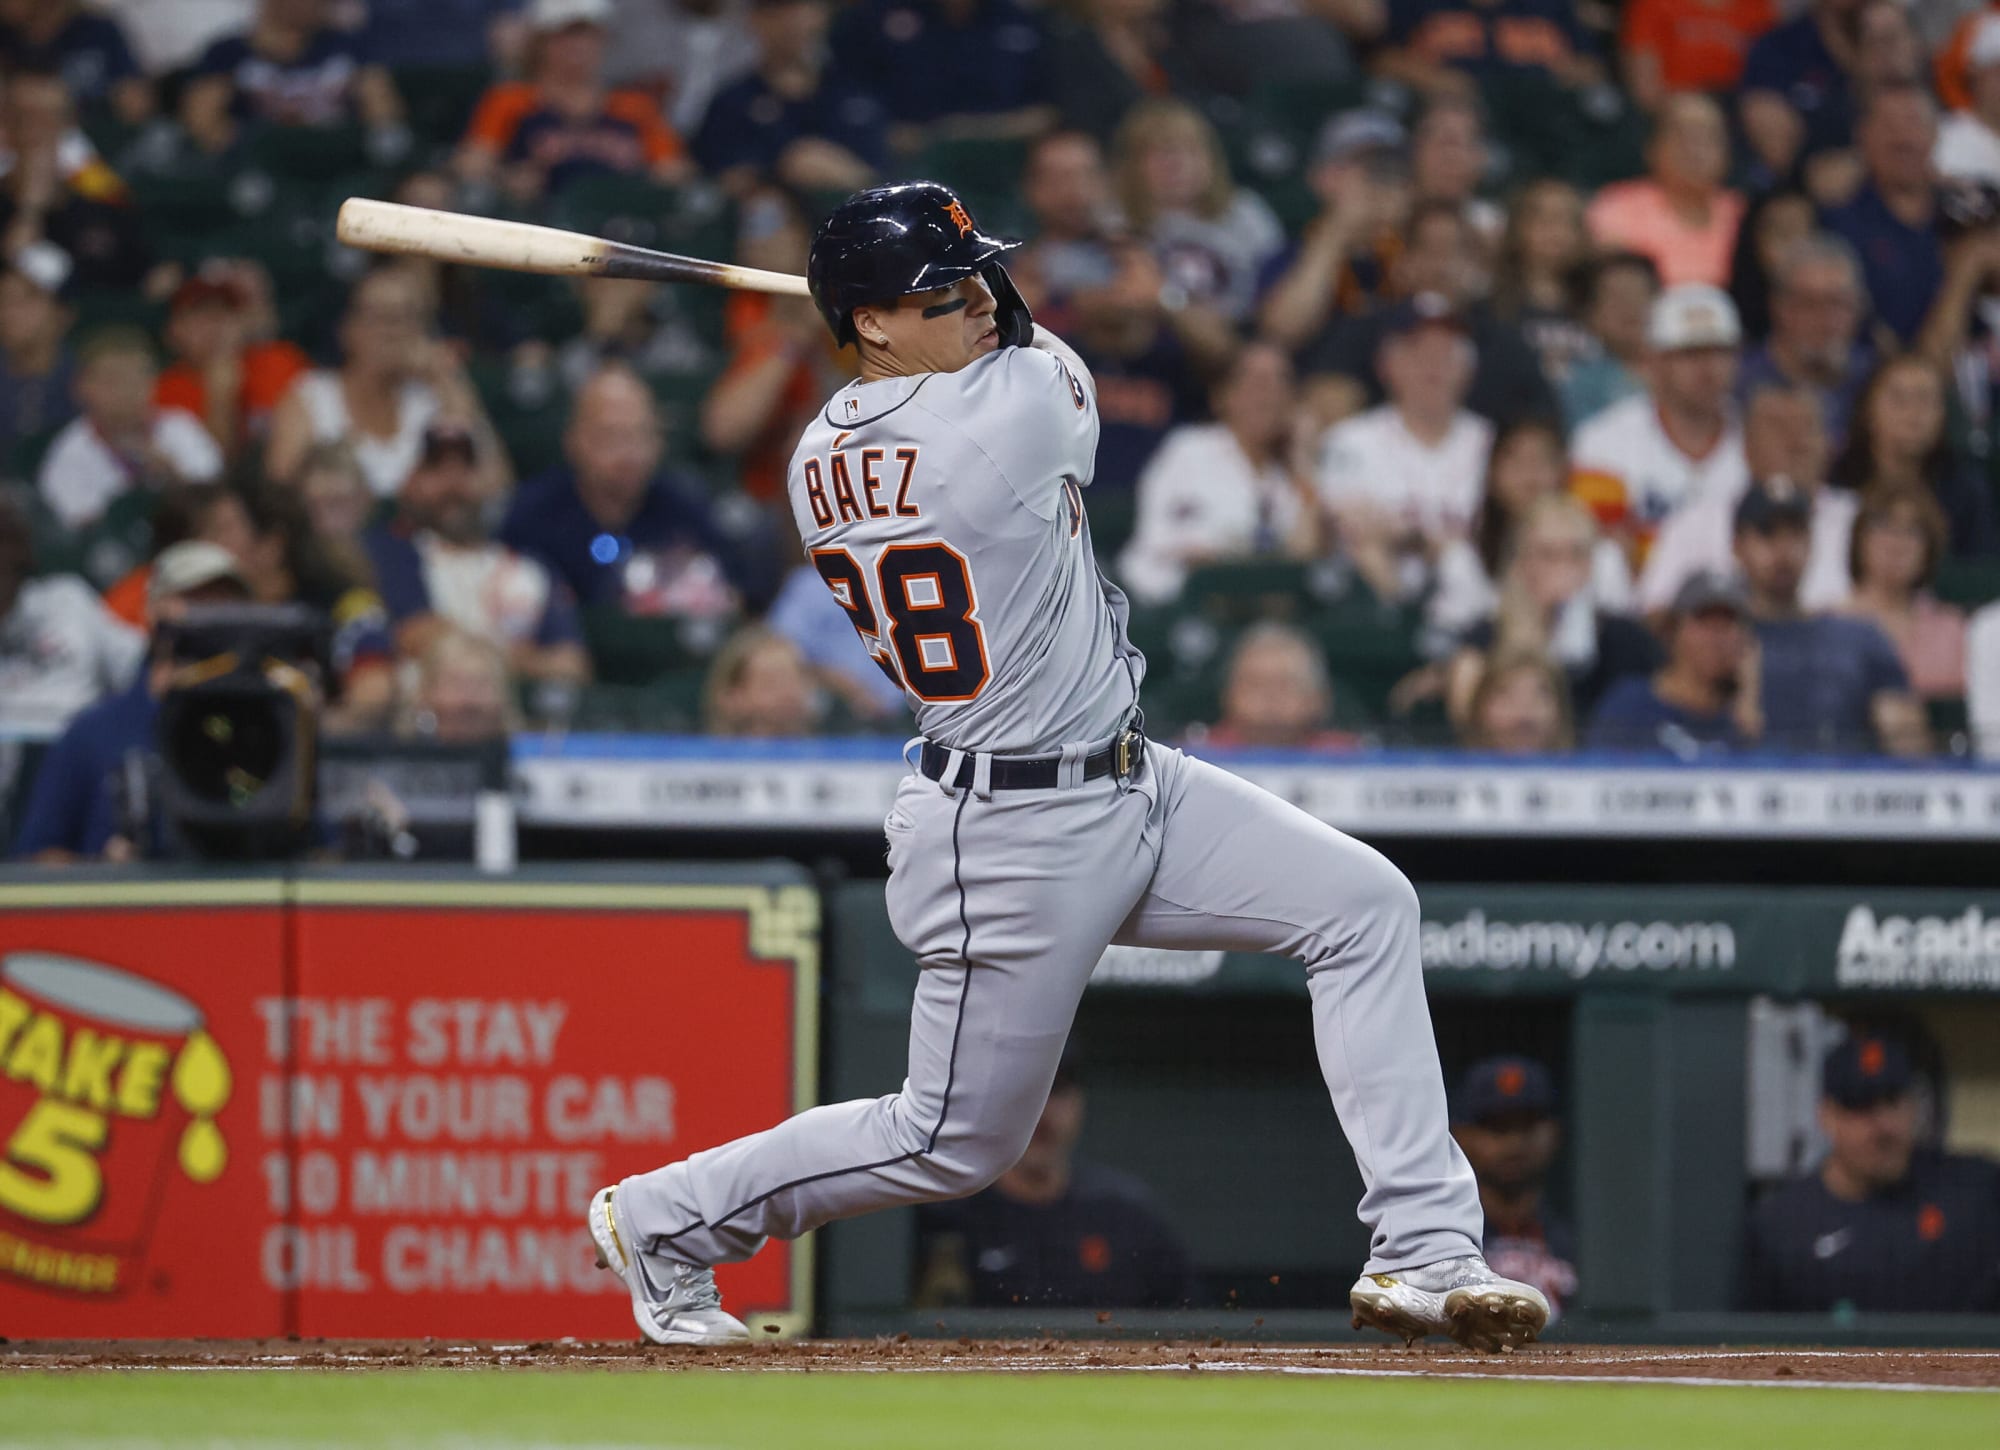 Detroit Tigers: Javier Báez needs to up his plate discipline immensely